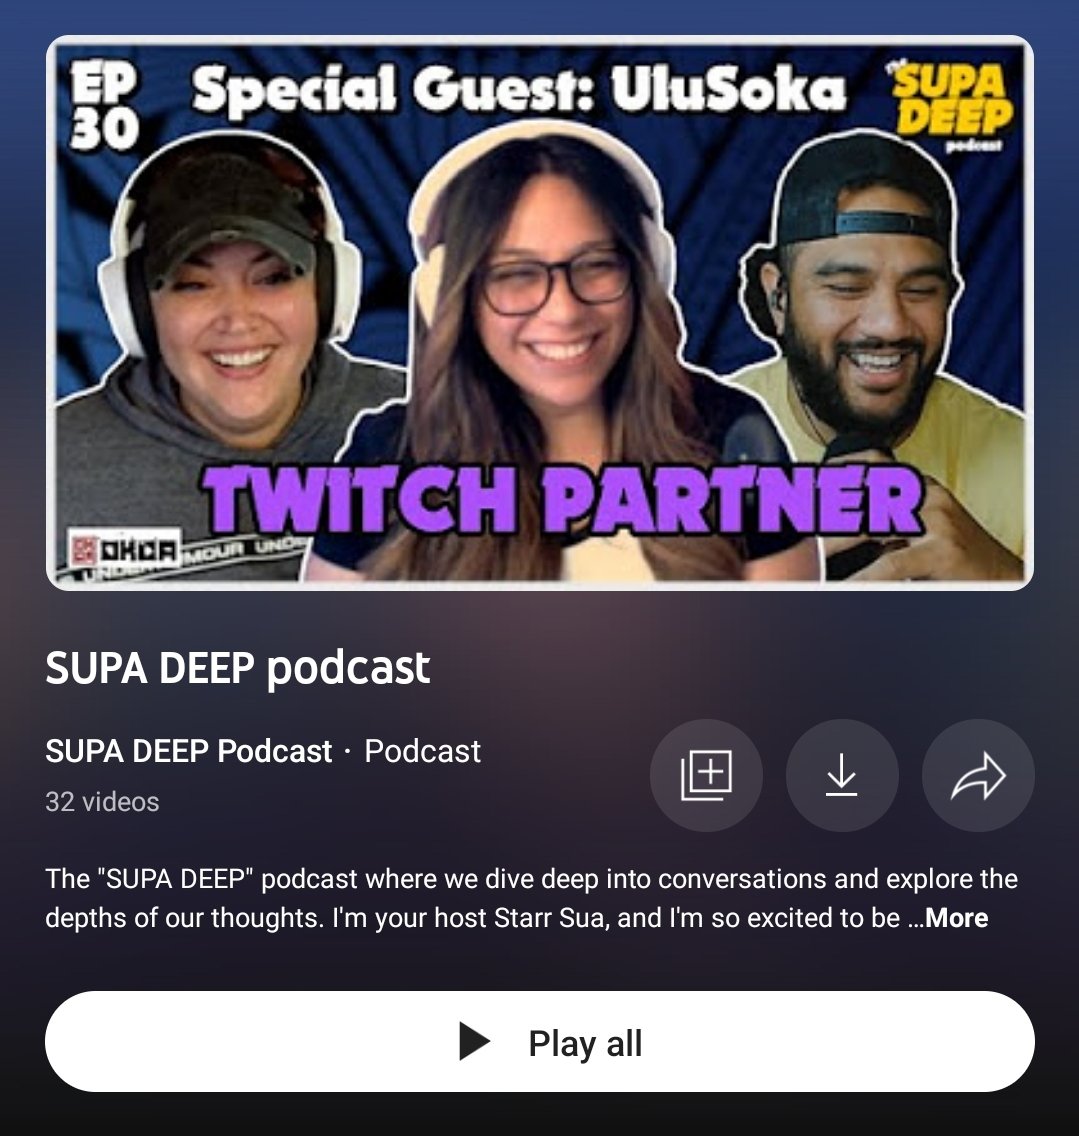 #TwitchPartner @ulusoka joins the podcast and shares her story! Check out the episode *LINK IN BIO* #supadeeppod #podcast #youtubepodcast #spotifypodcast #twitch #gamer #streaner #twitchstreamer #ulusoka  #polynesian #hawaiian #samoan #pacificislanders